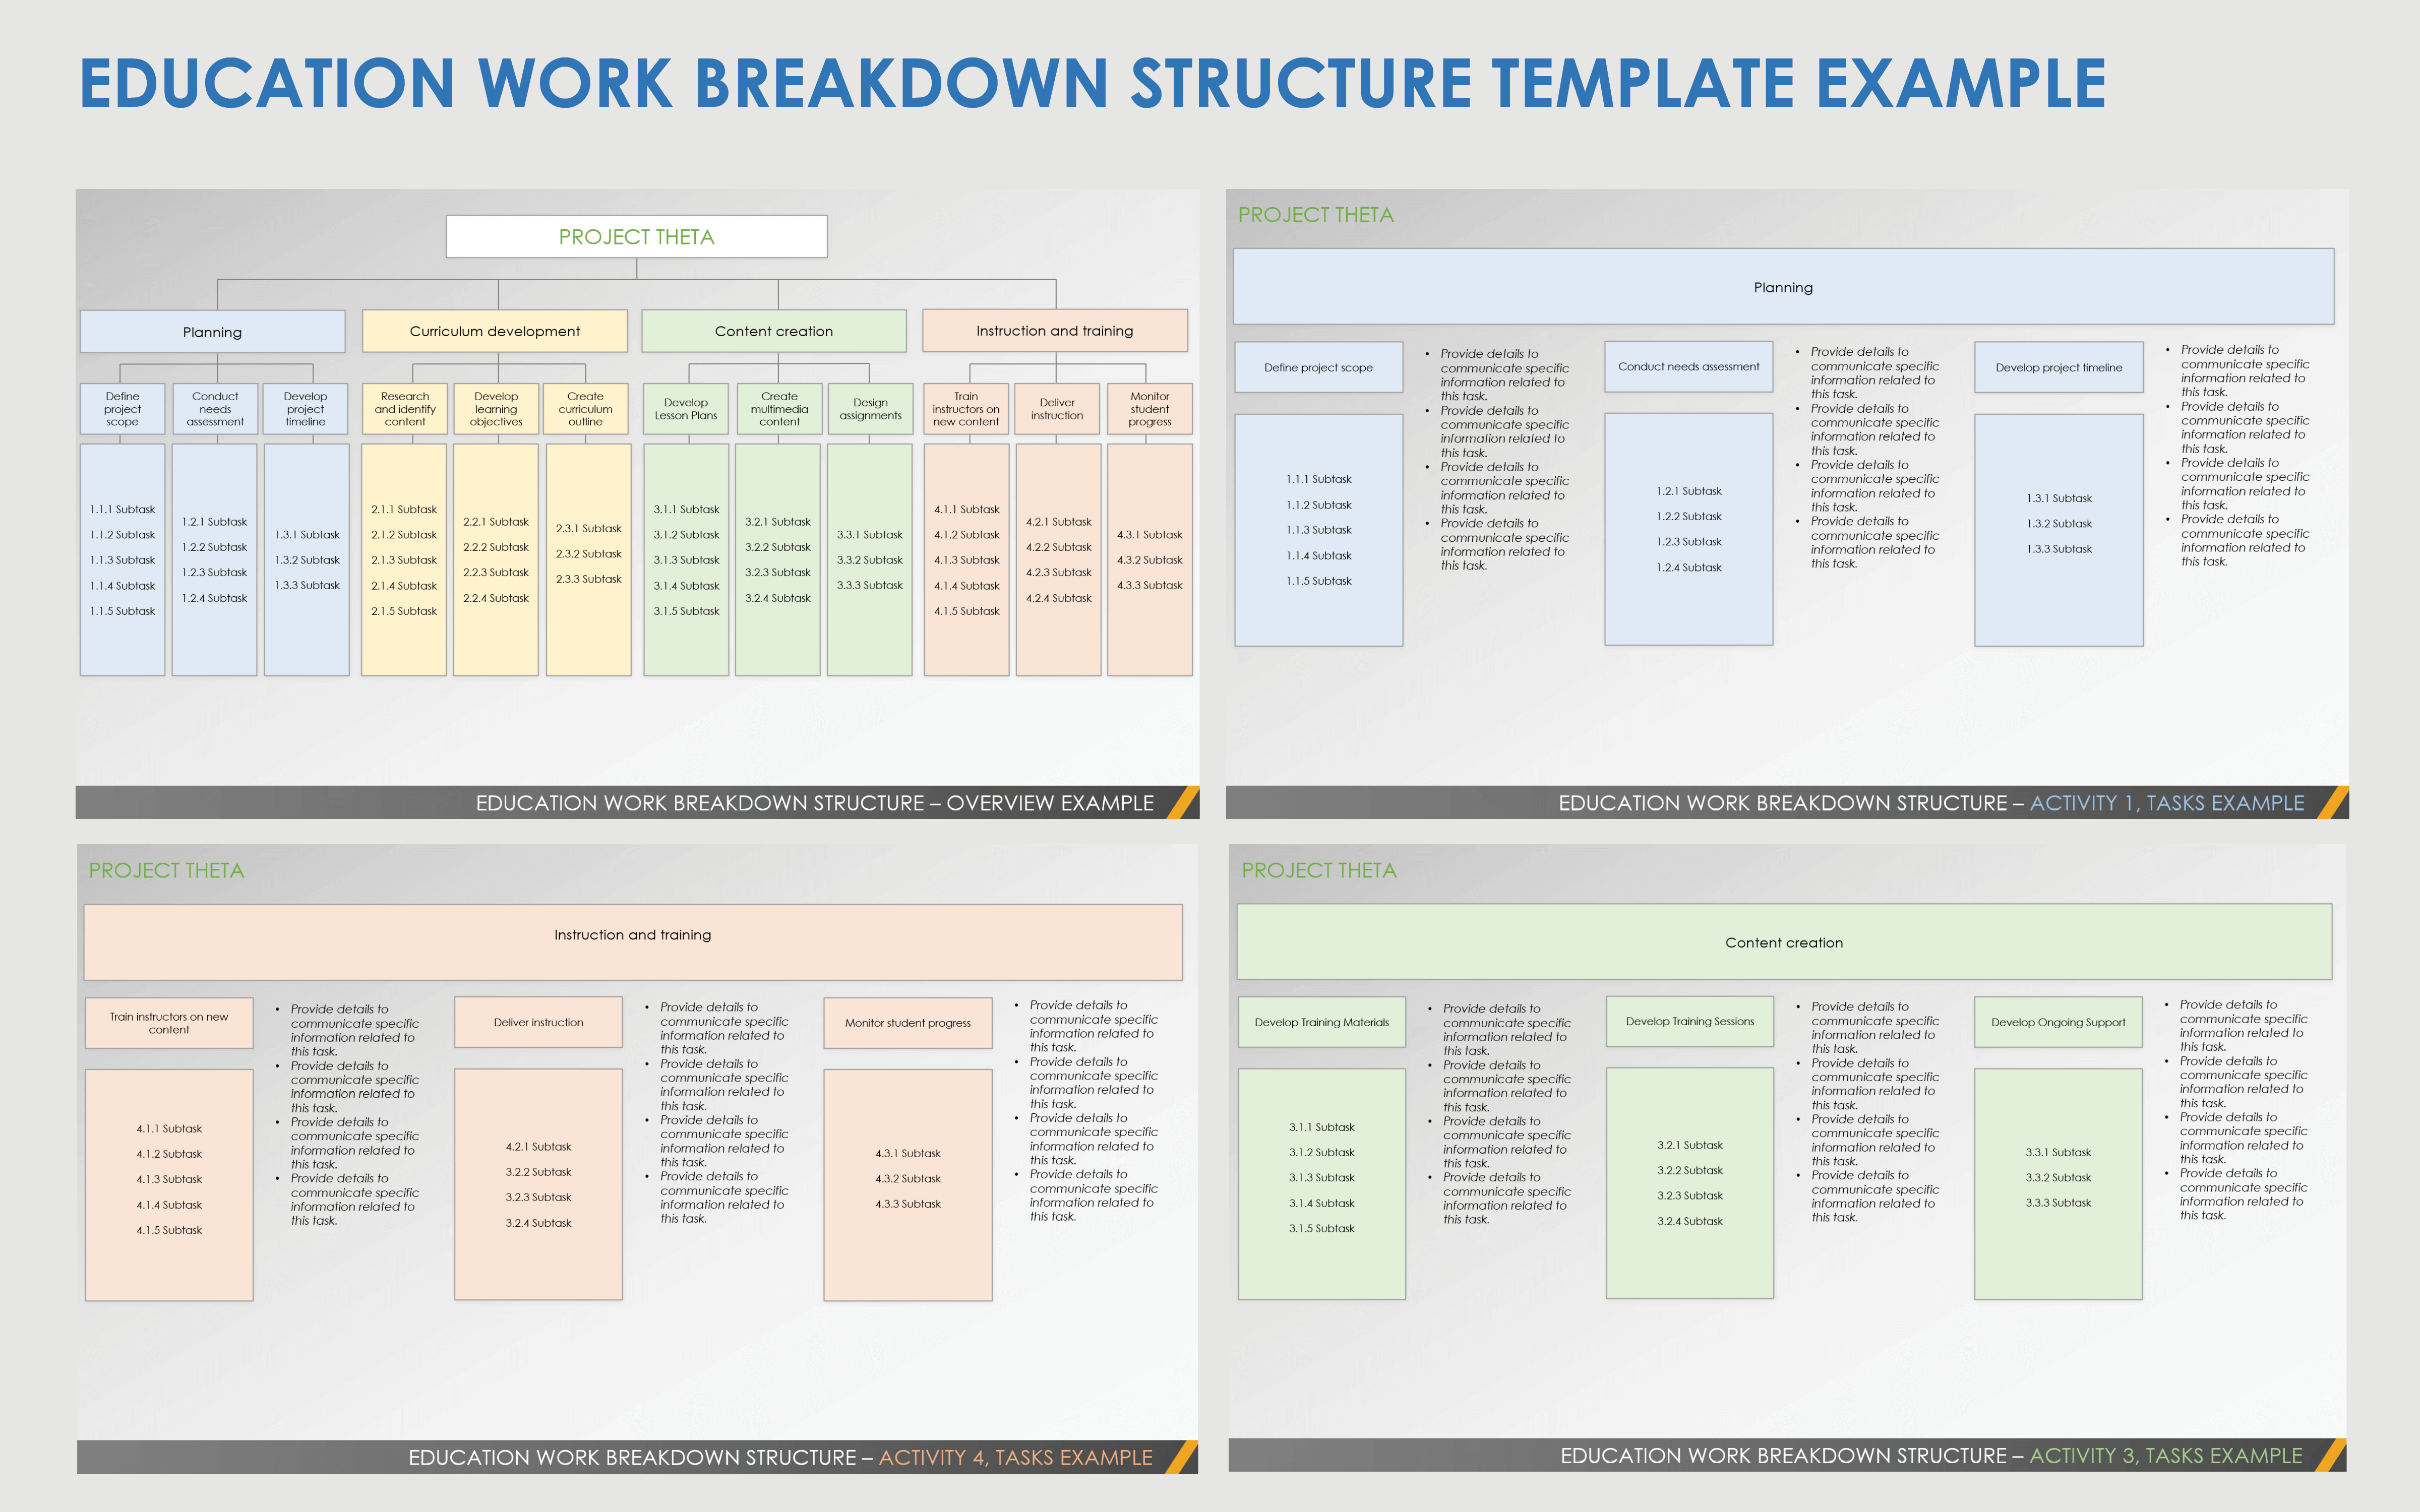 Education Work Breakdown Structure Template Example PowerPoint